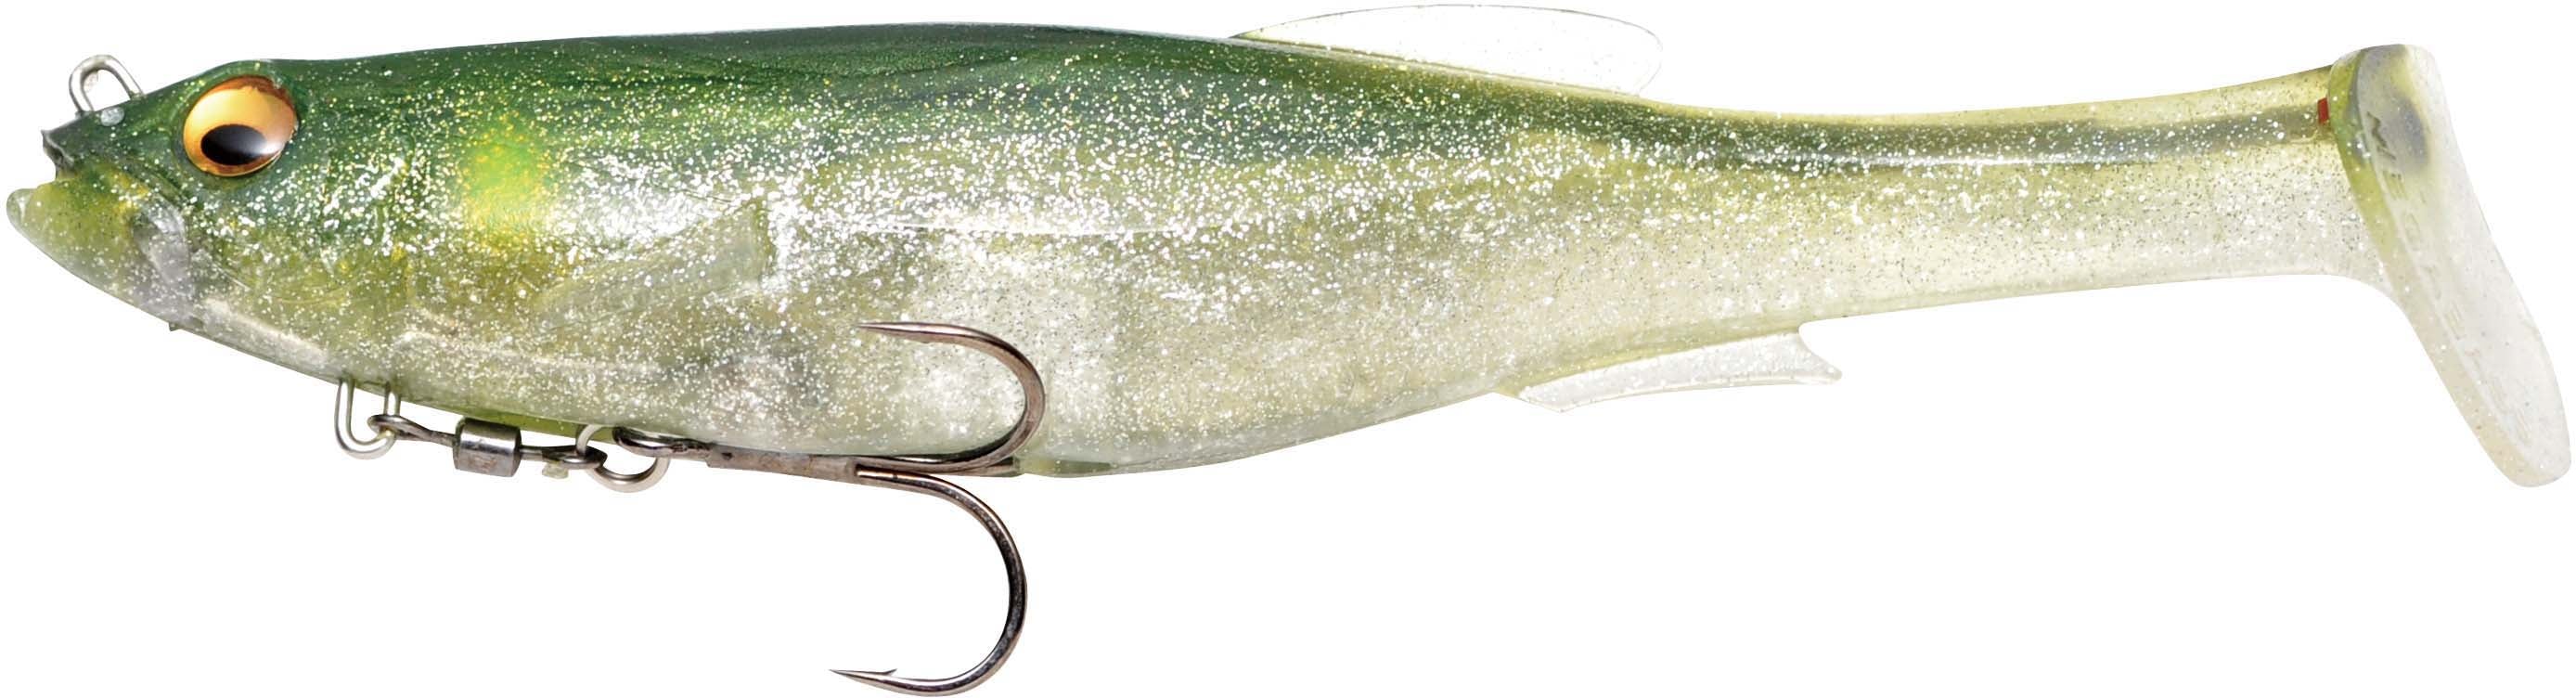 Megabass Magdraft Swimbaits UK: Comfort is the New Fashion! - Coyote Bait &  Tackle Sales 